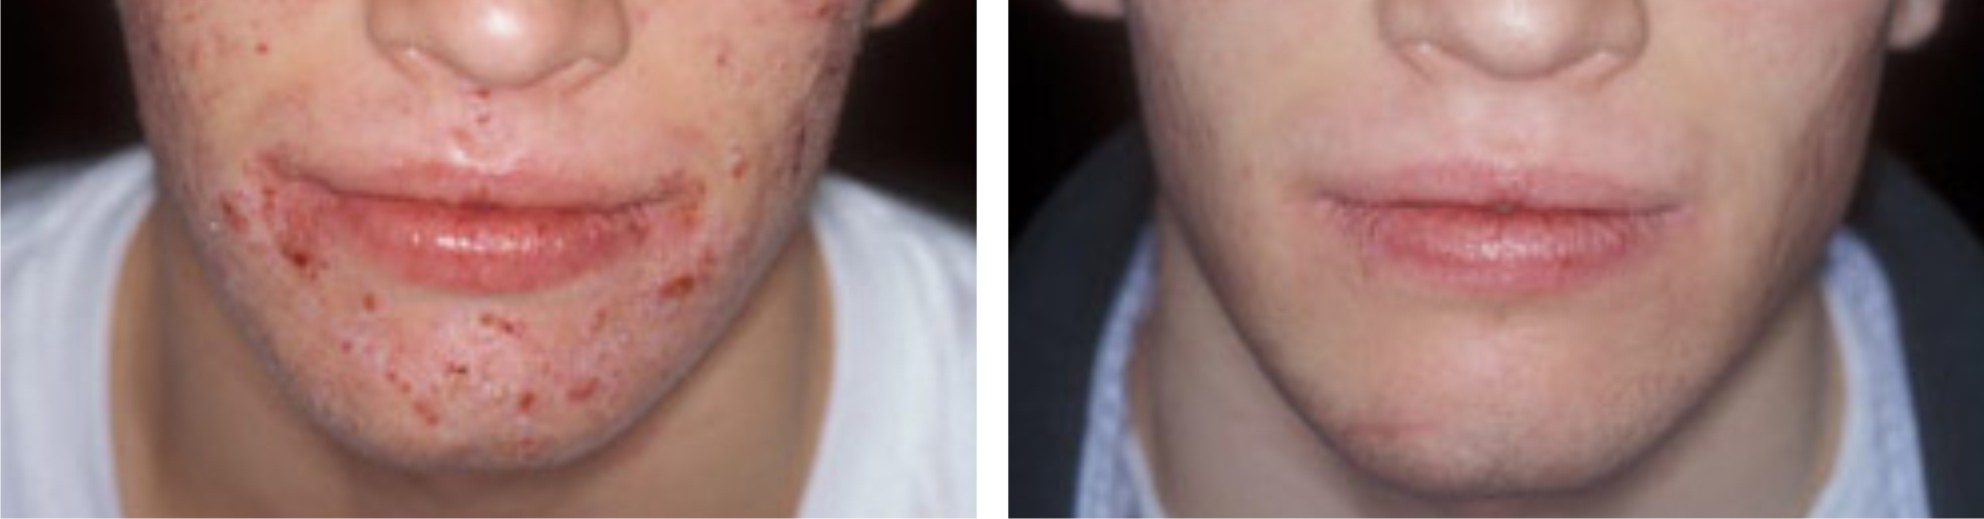 Laser Acne Scar Removal Image Four